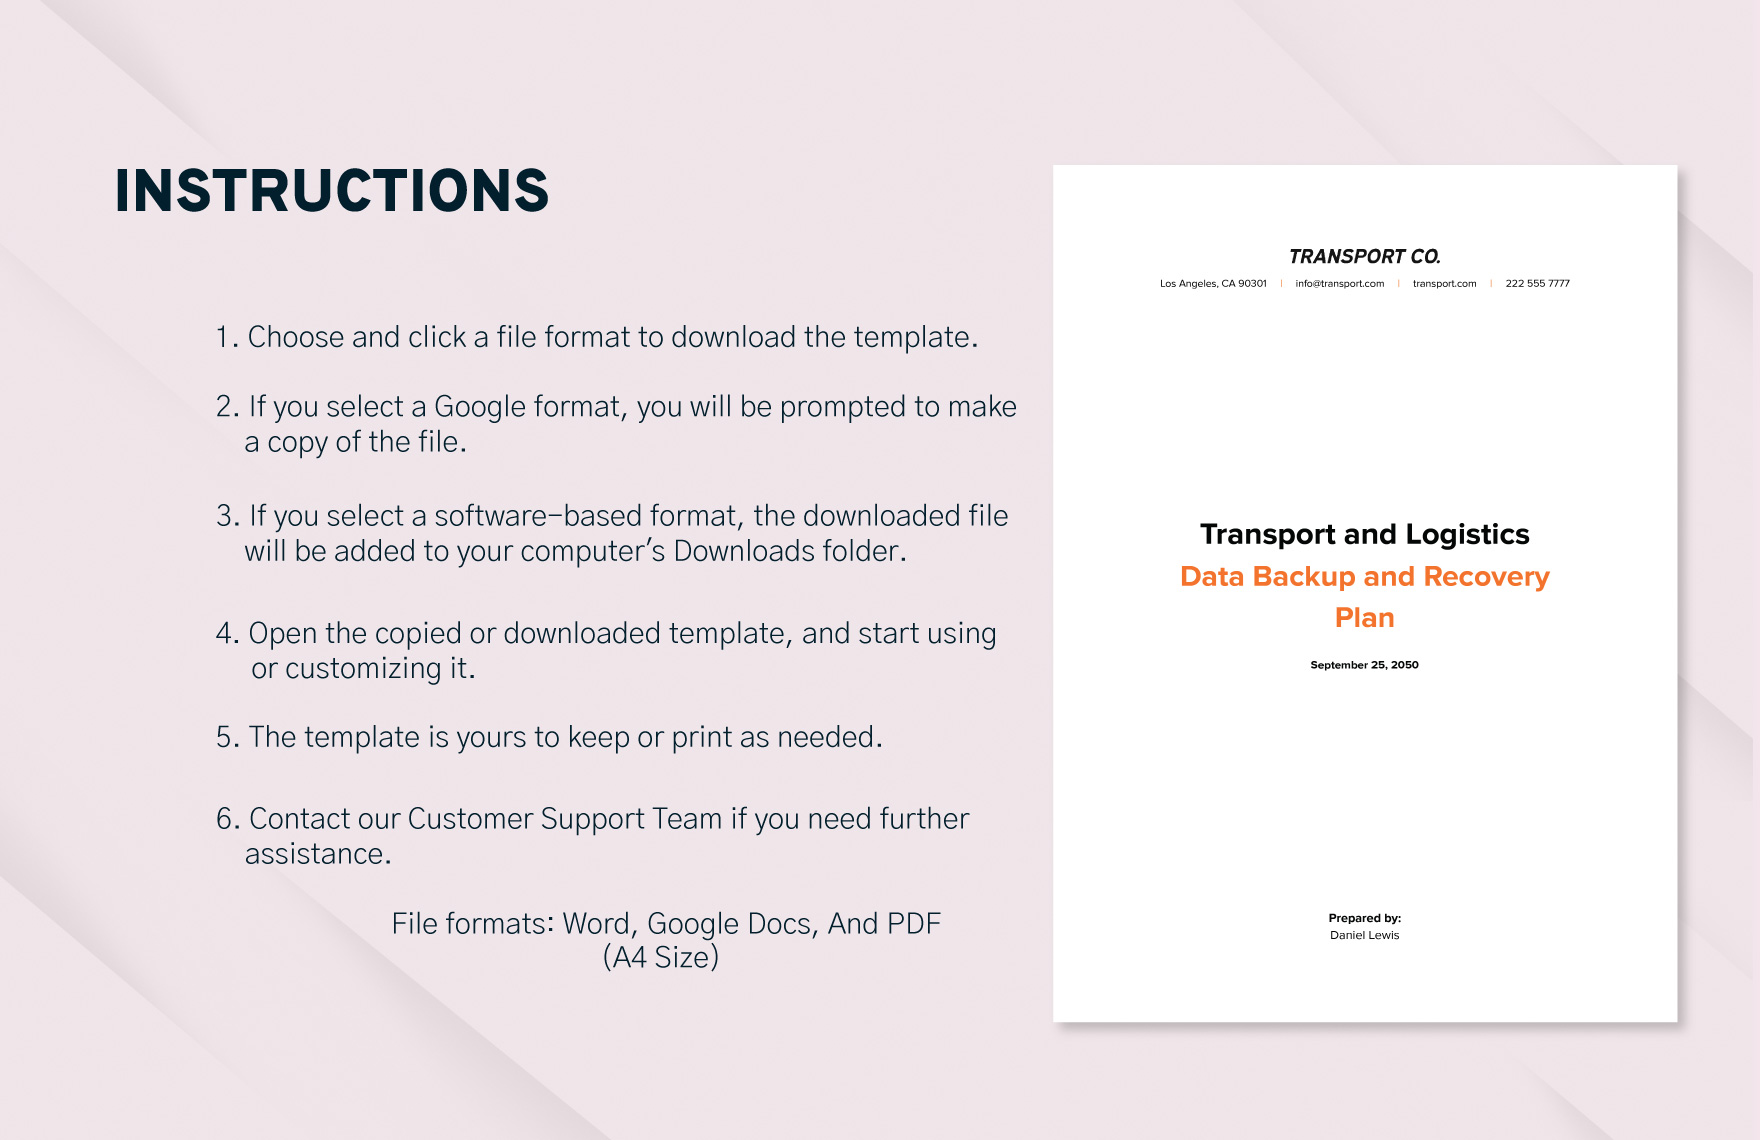 Transport and Logistics Data Backup and Recovery Plan Template